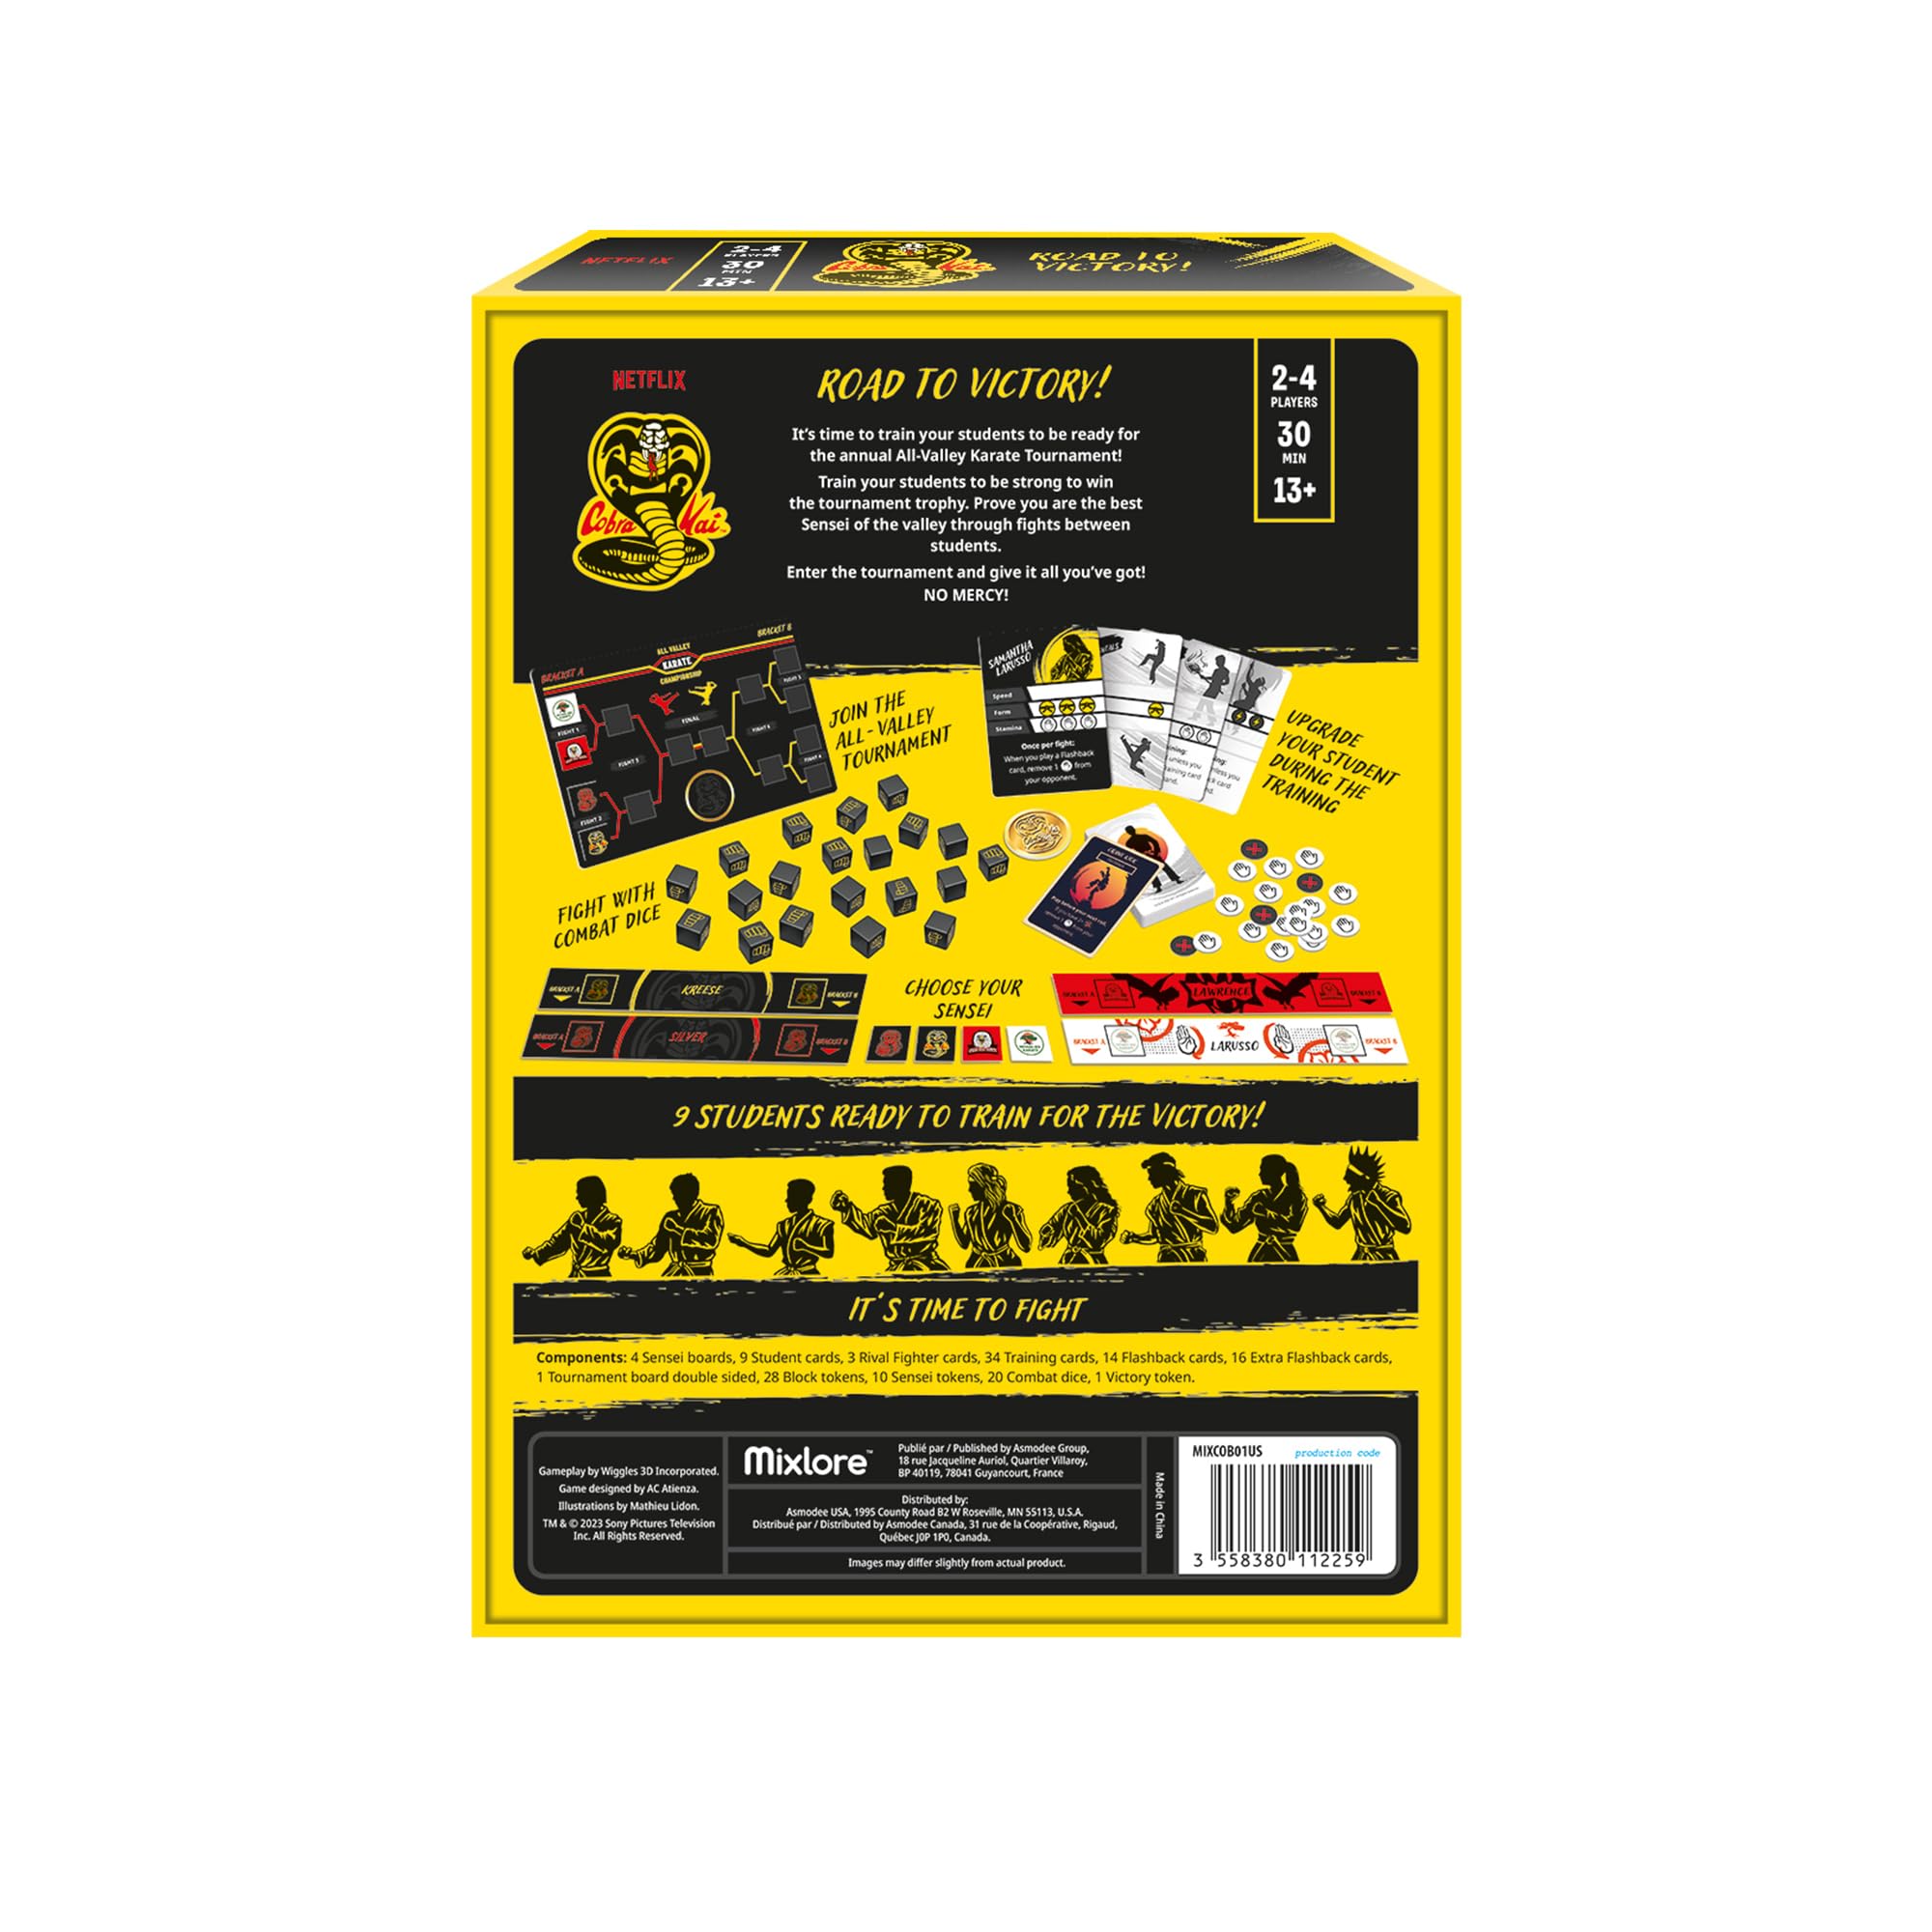 Cobra Kai - Road to Victory Board Game - Strategy Game Based on The Hit Netflix TV Series, Fun for Family Game Night, Ages 13+, 2-4 Players, 30 Minute Playtime, Made by Mixlore